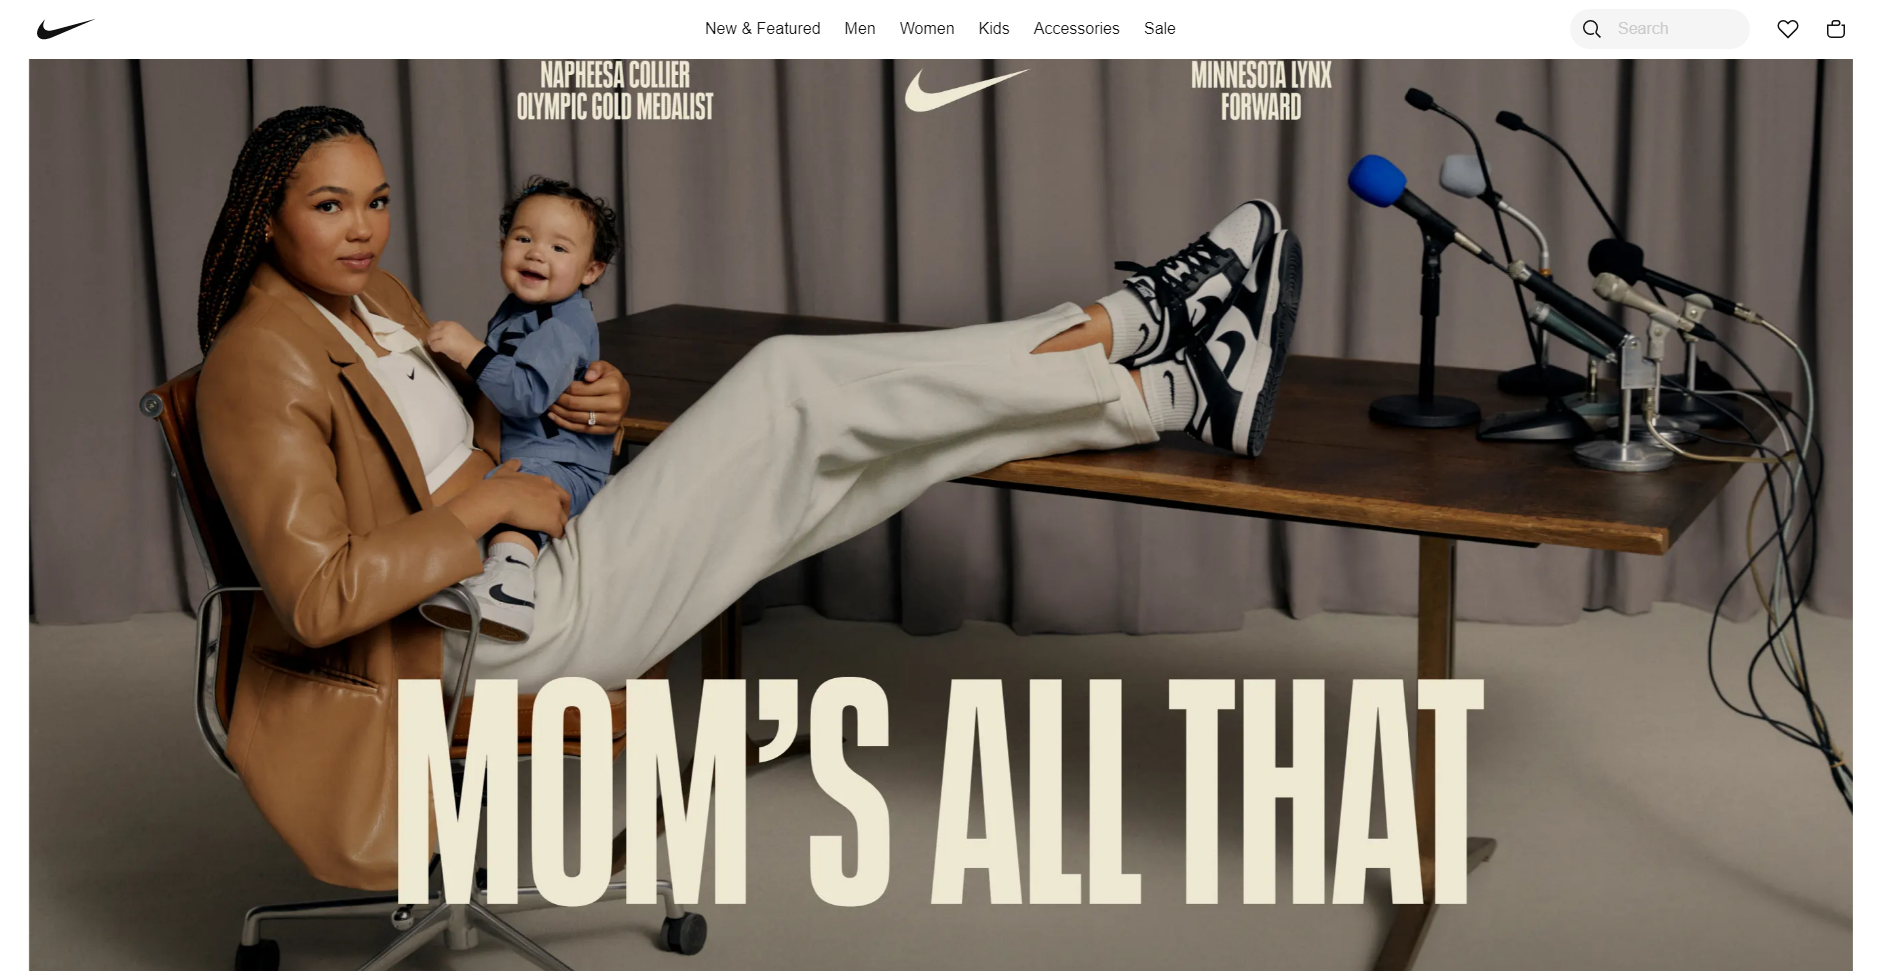 screenshot of the Nike homepage, which features a large header reading "Mom's all that" in Nike's iconic typeface